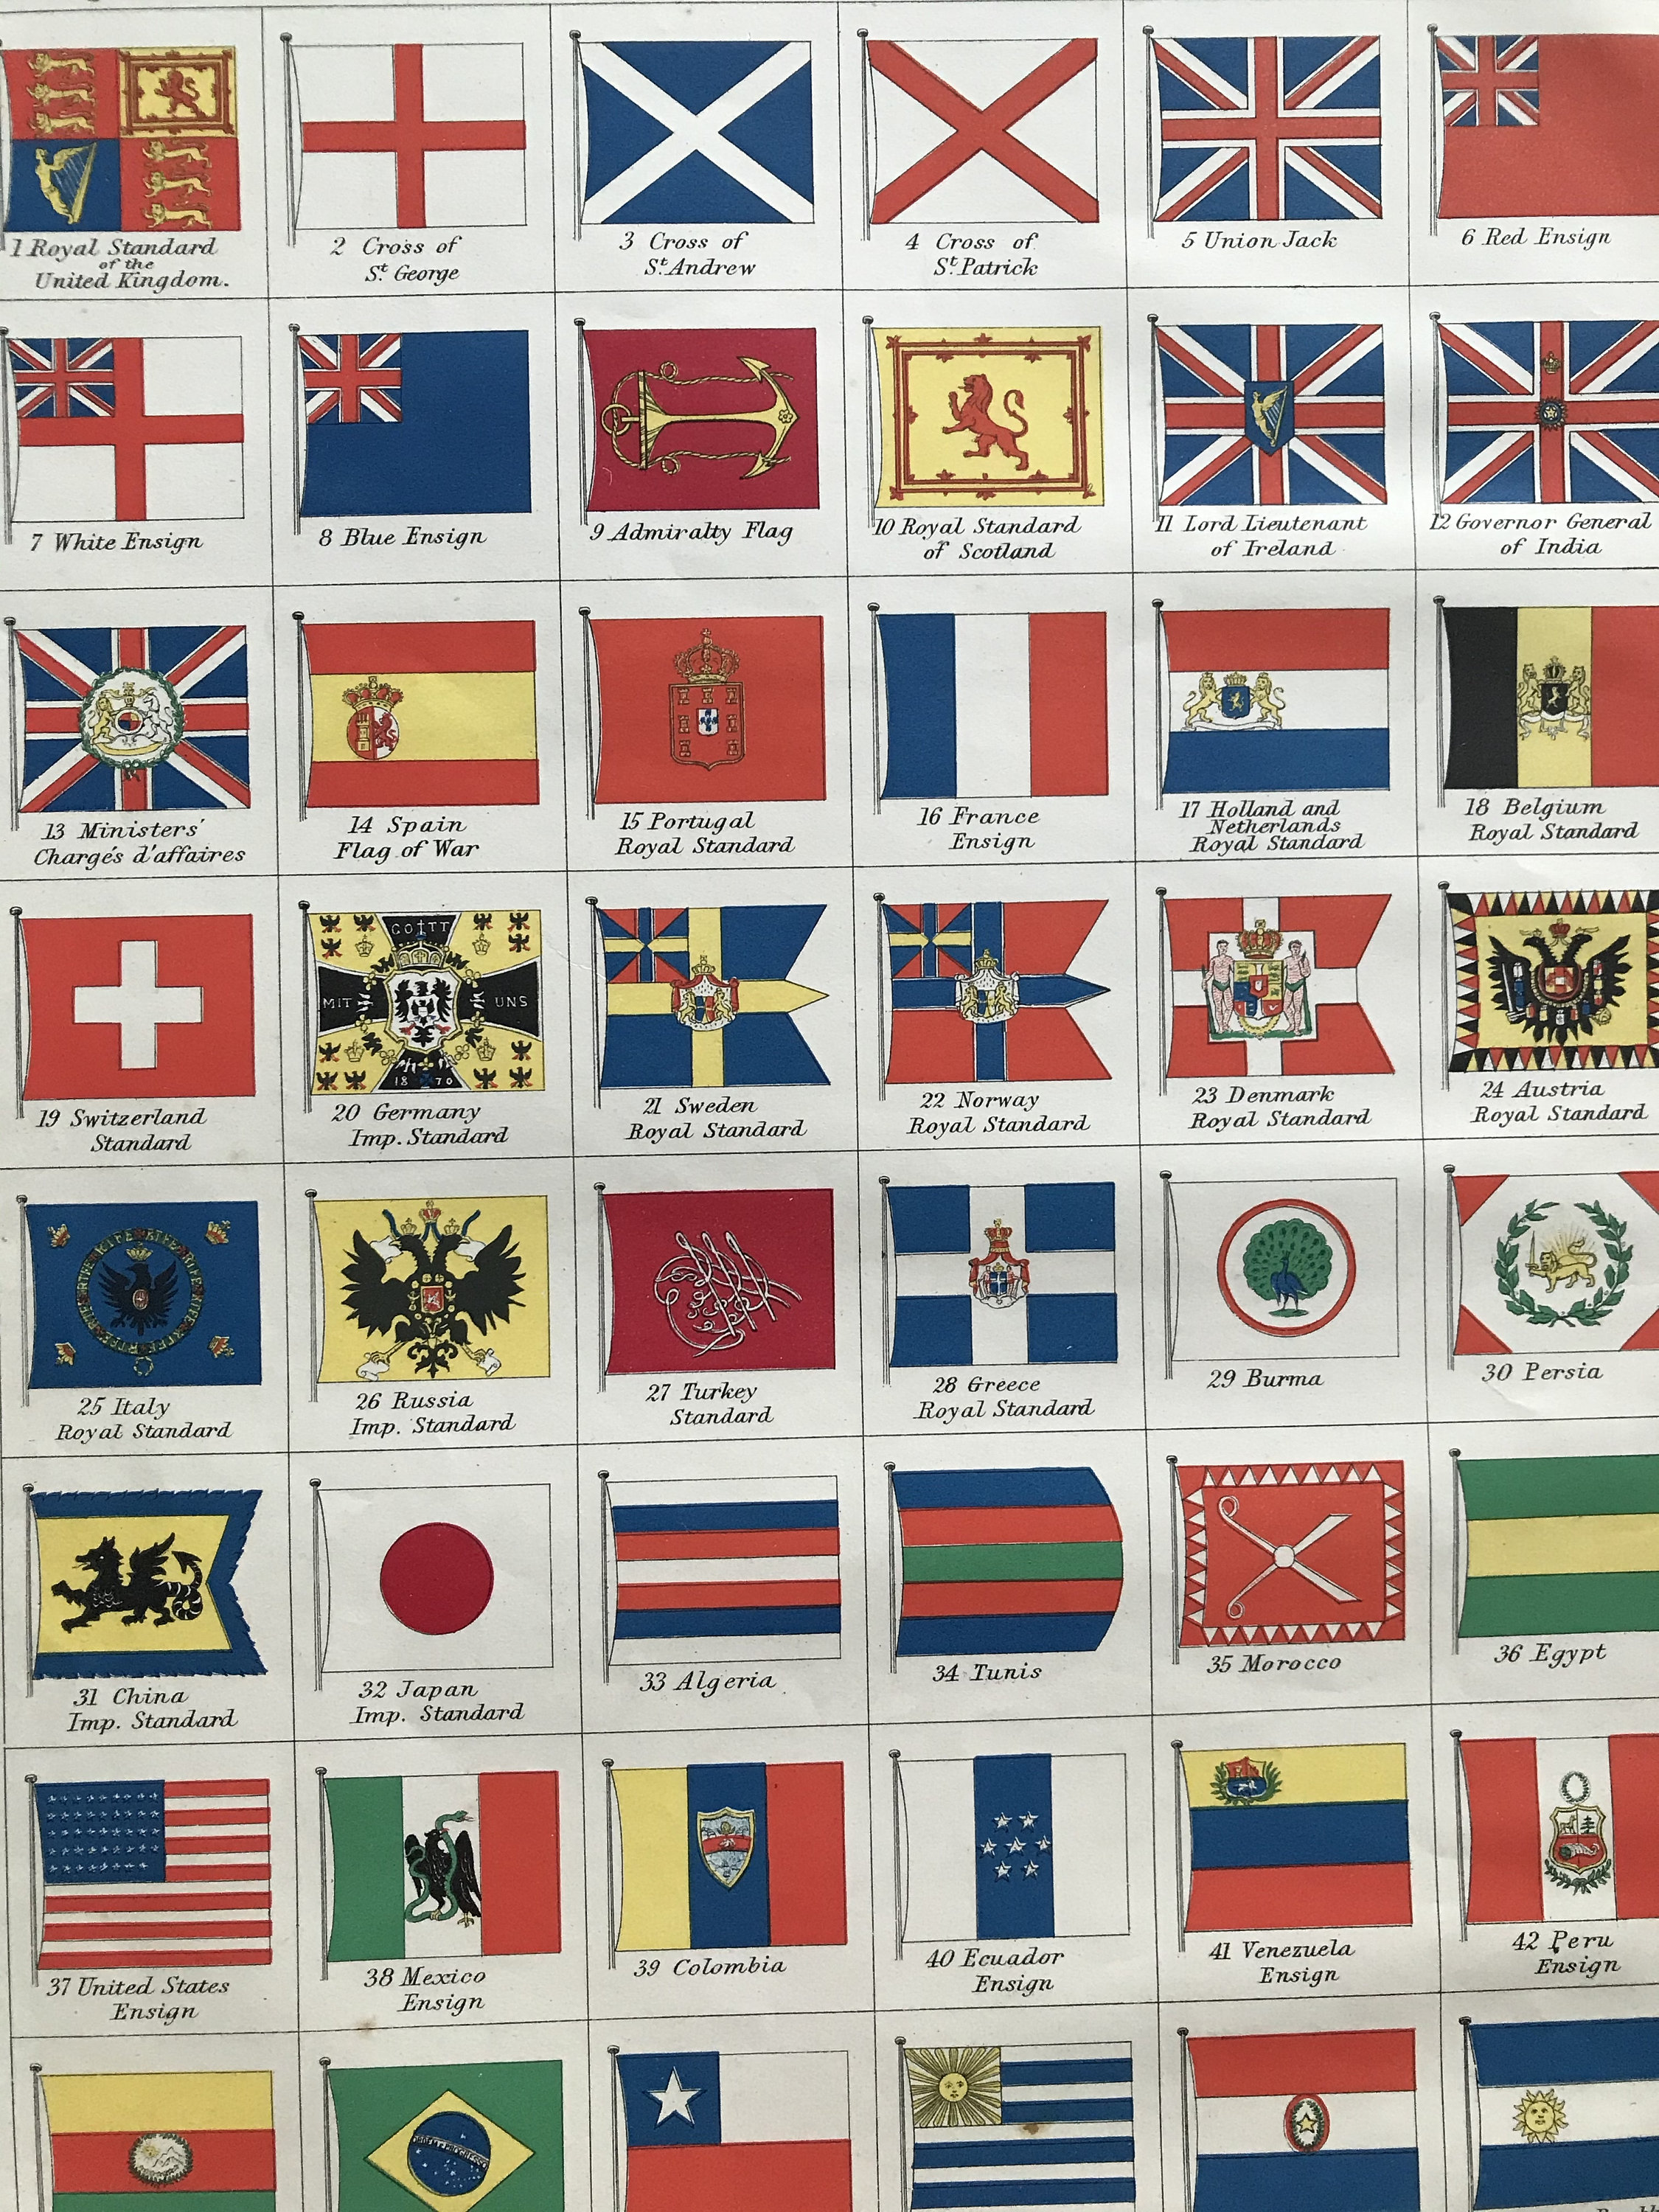 1899 Flags Of All Nations Original Antique Print Ensign Royal